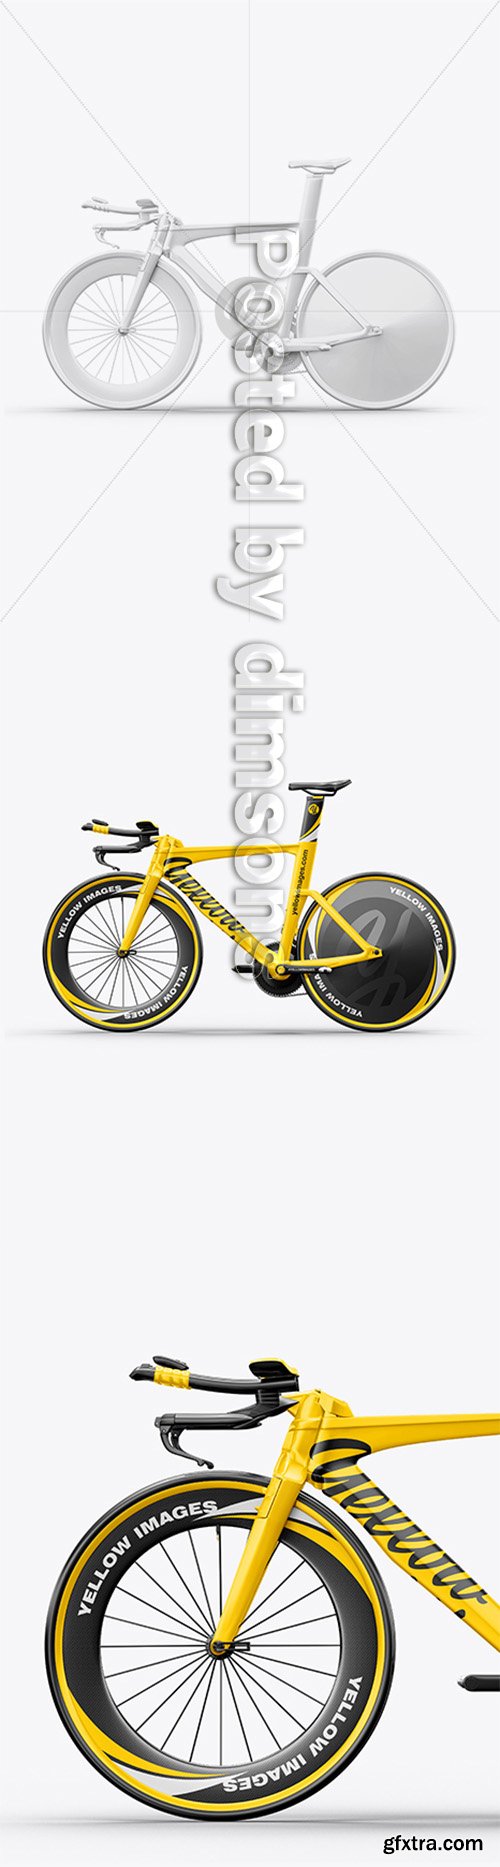 Carbon Triathlon Bicycle Mockup - Left Side View 40618